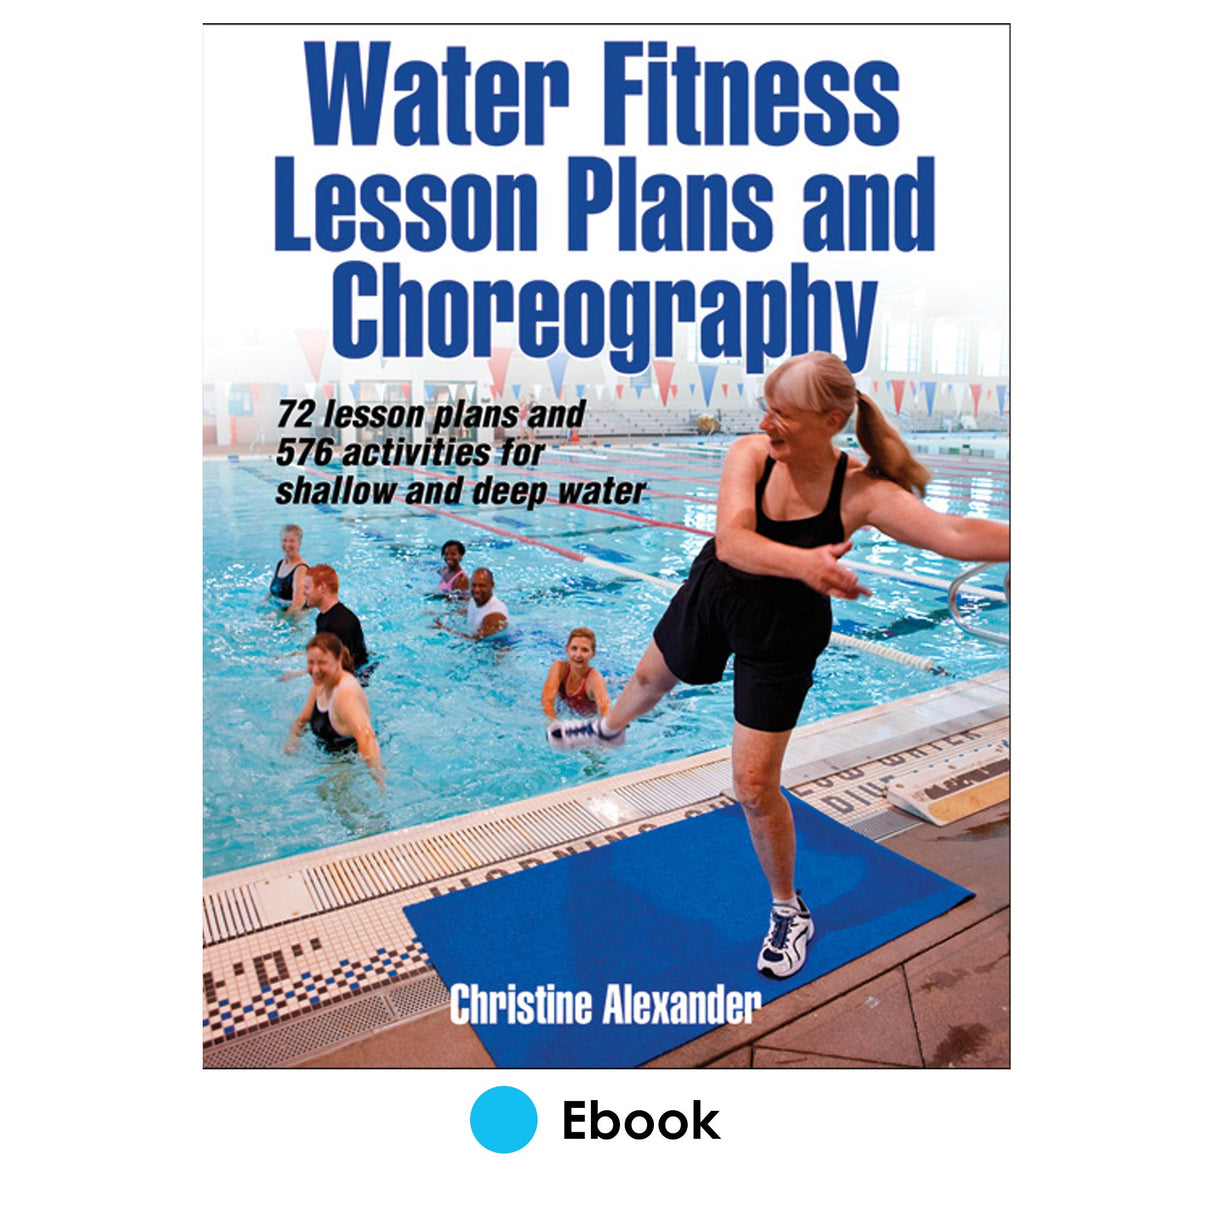 Water Fitness Lesson Plans and Choreography PDF